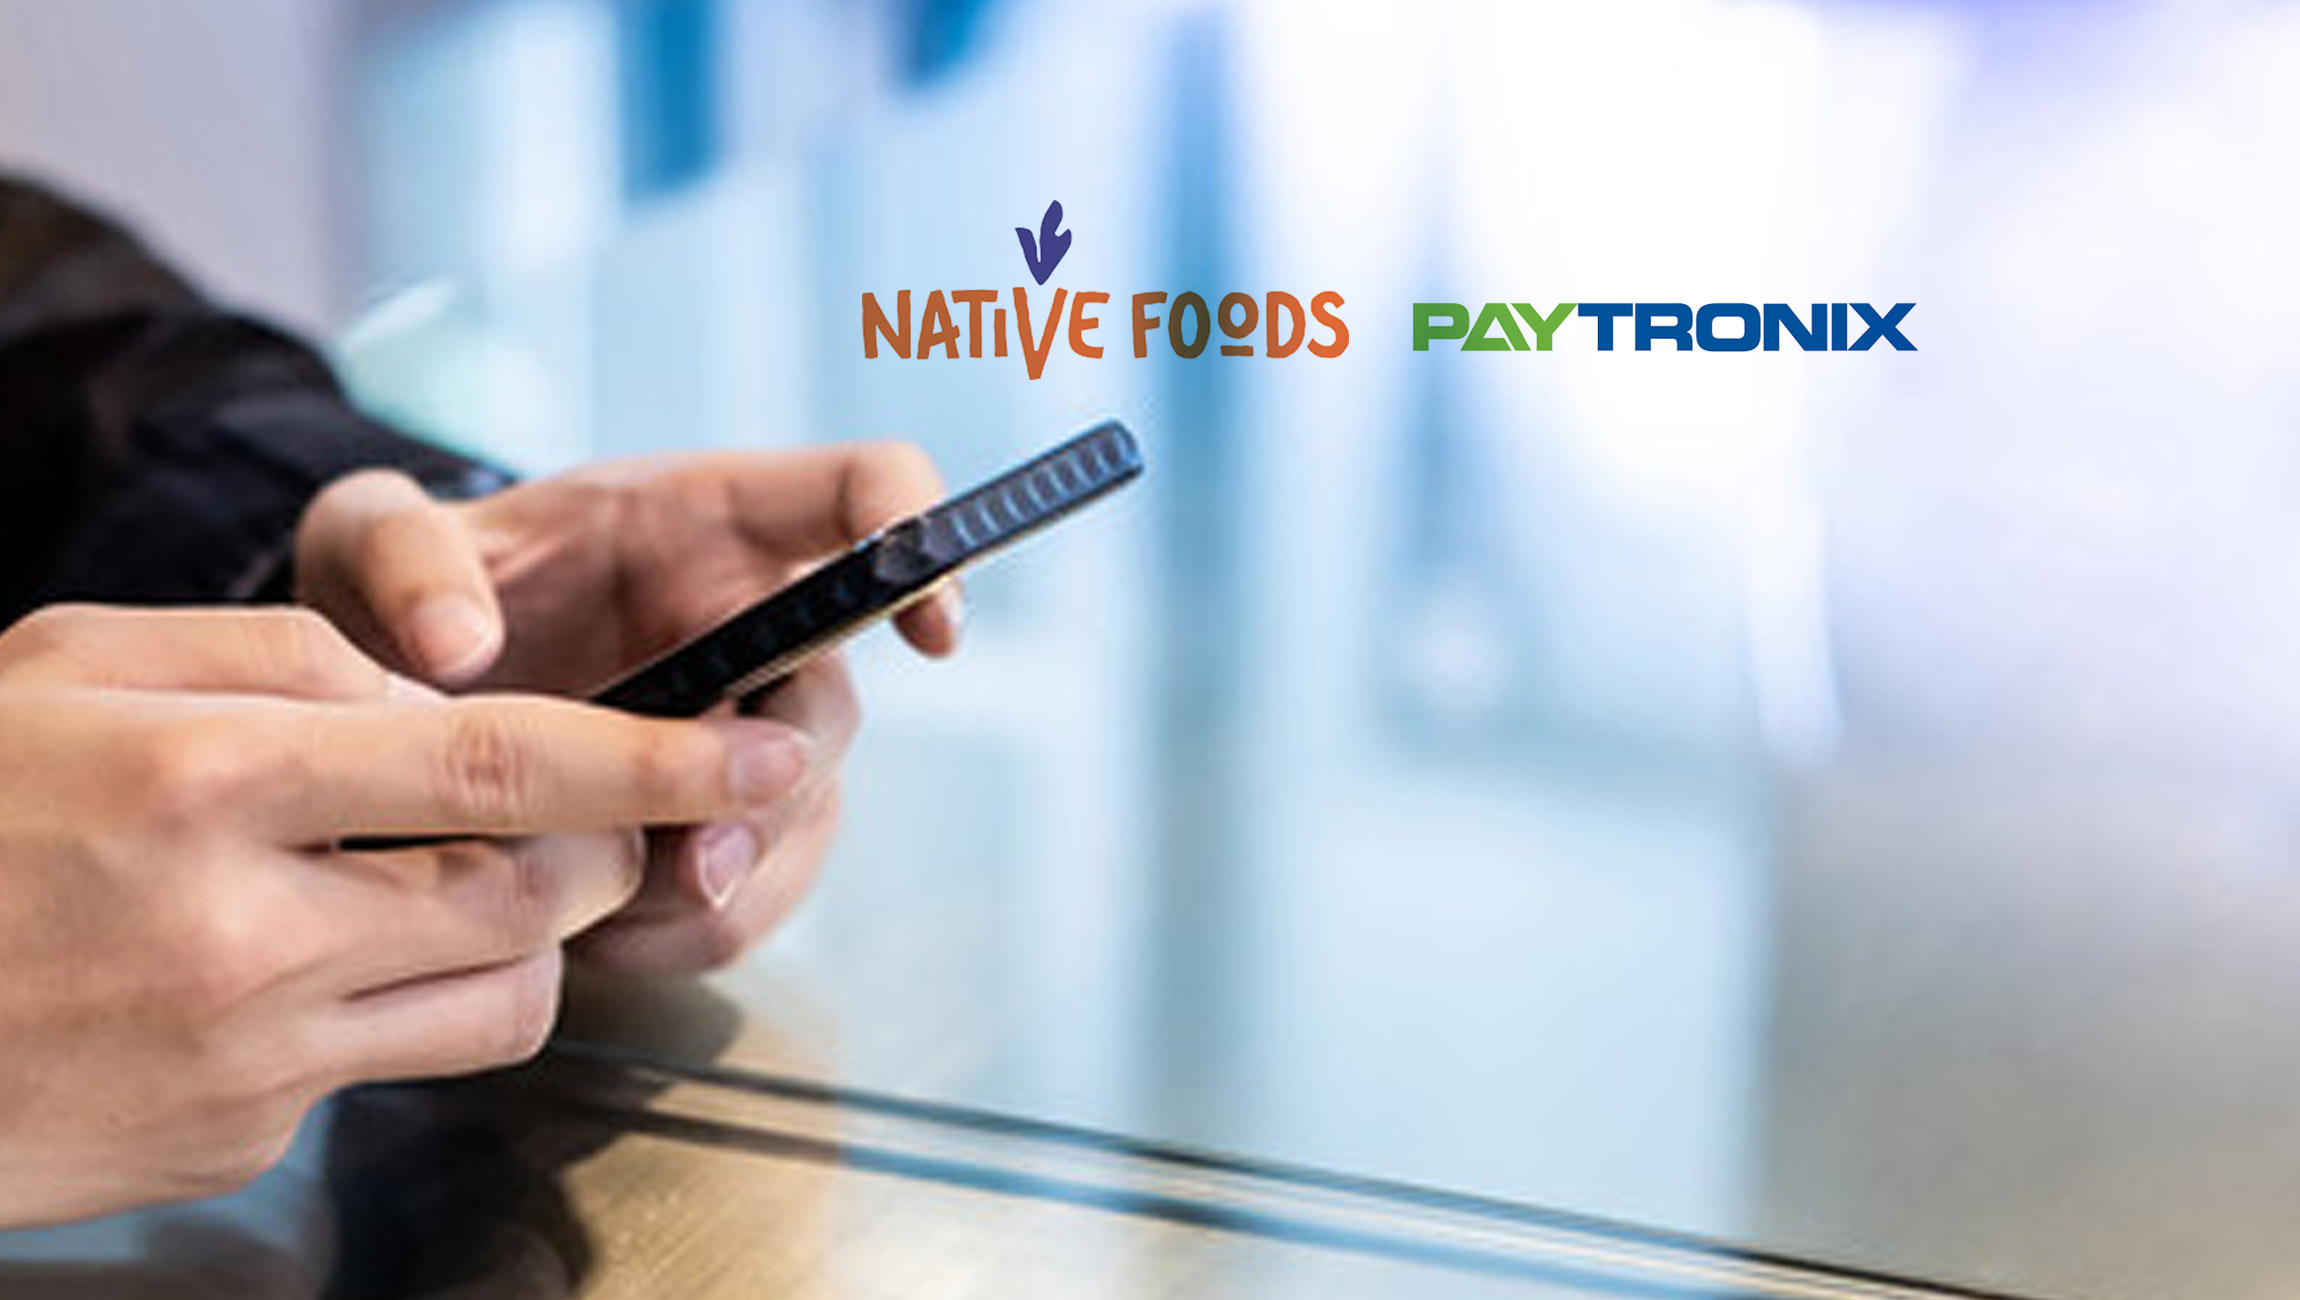 Native Foods Launches New Mobile App and Rewards With Paytronix